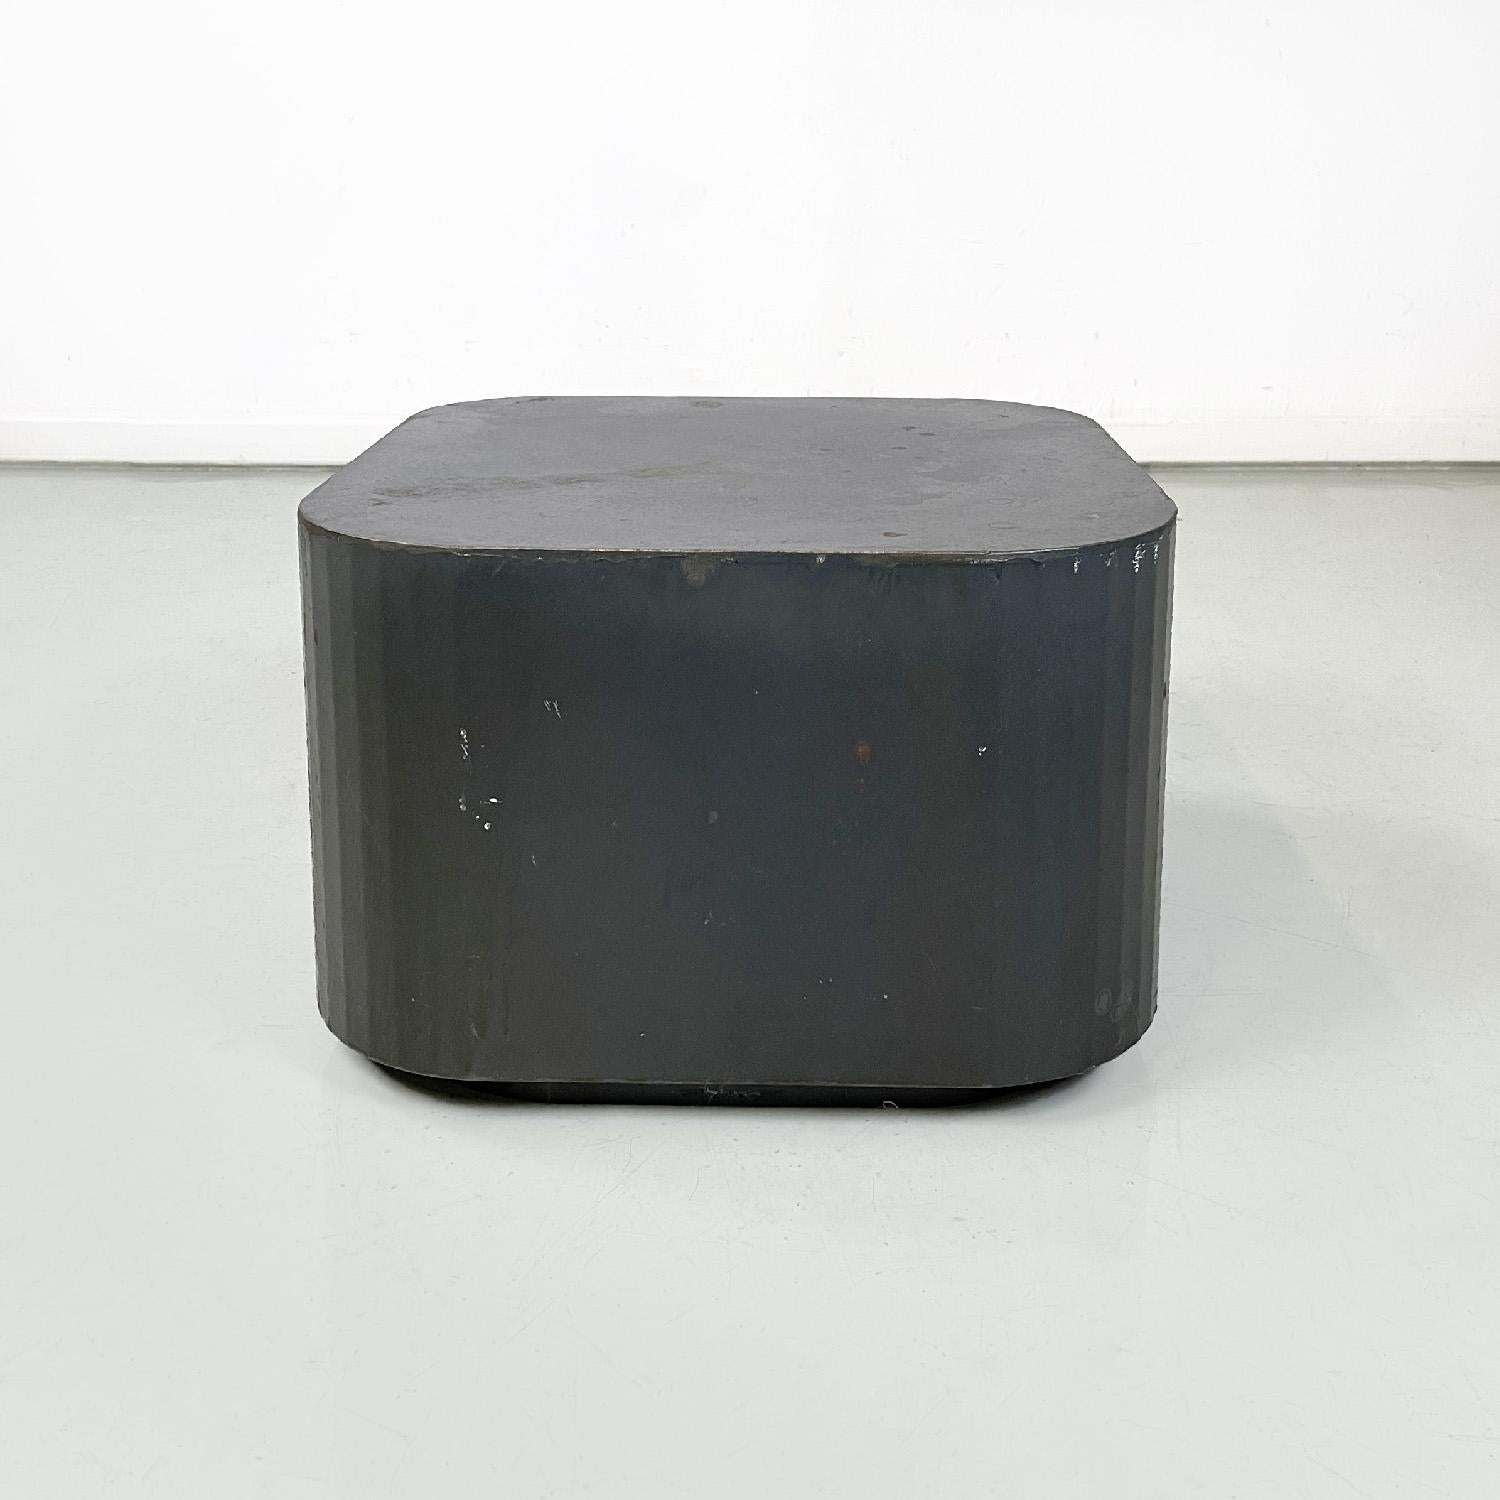 Italian post-modern squared coffee table or pedestal in burnished steel, 2000s
Burnished steel coffee table or pedestal with square base. The corners are rounded, it has a slightly smaller base than the main structure. Can also be used in an outdoor